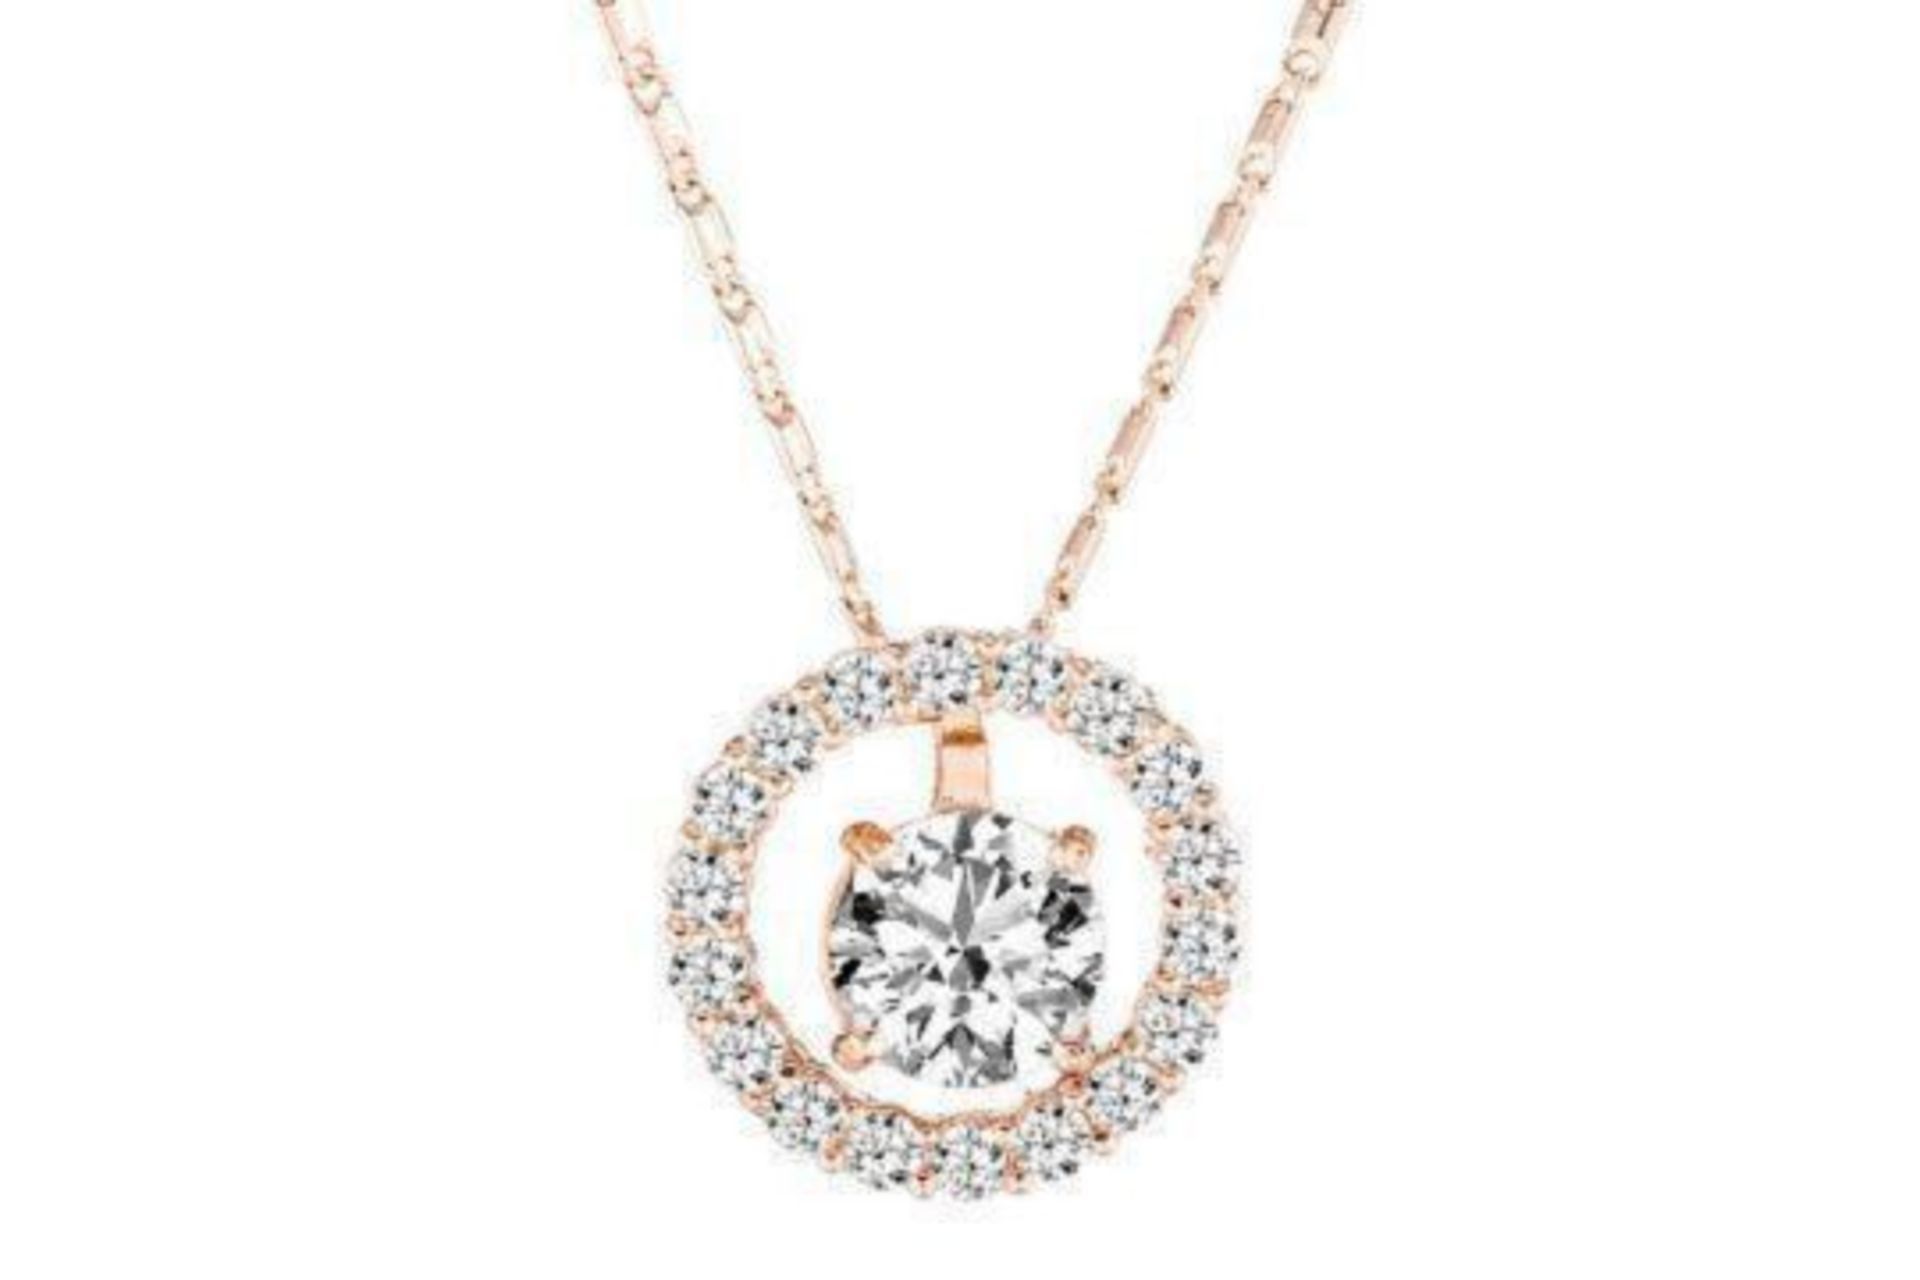 5 X BRAND NEW DIAMONDSTYLE LONDON SOLSTICE PENDANT IN ROSE GOLD WITH CERTIFICATION OF AUTHENTICITY